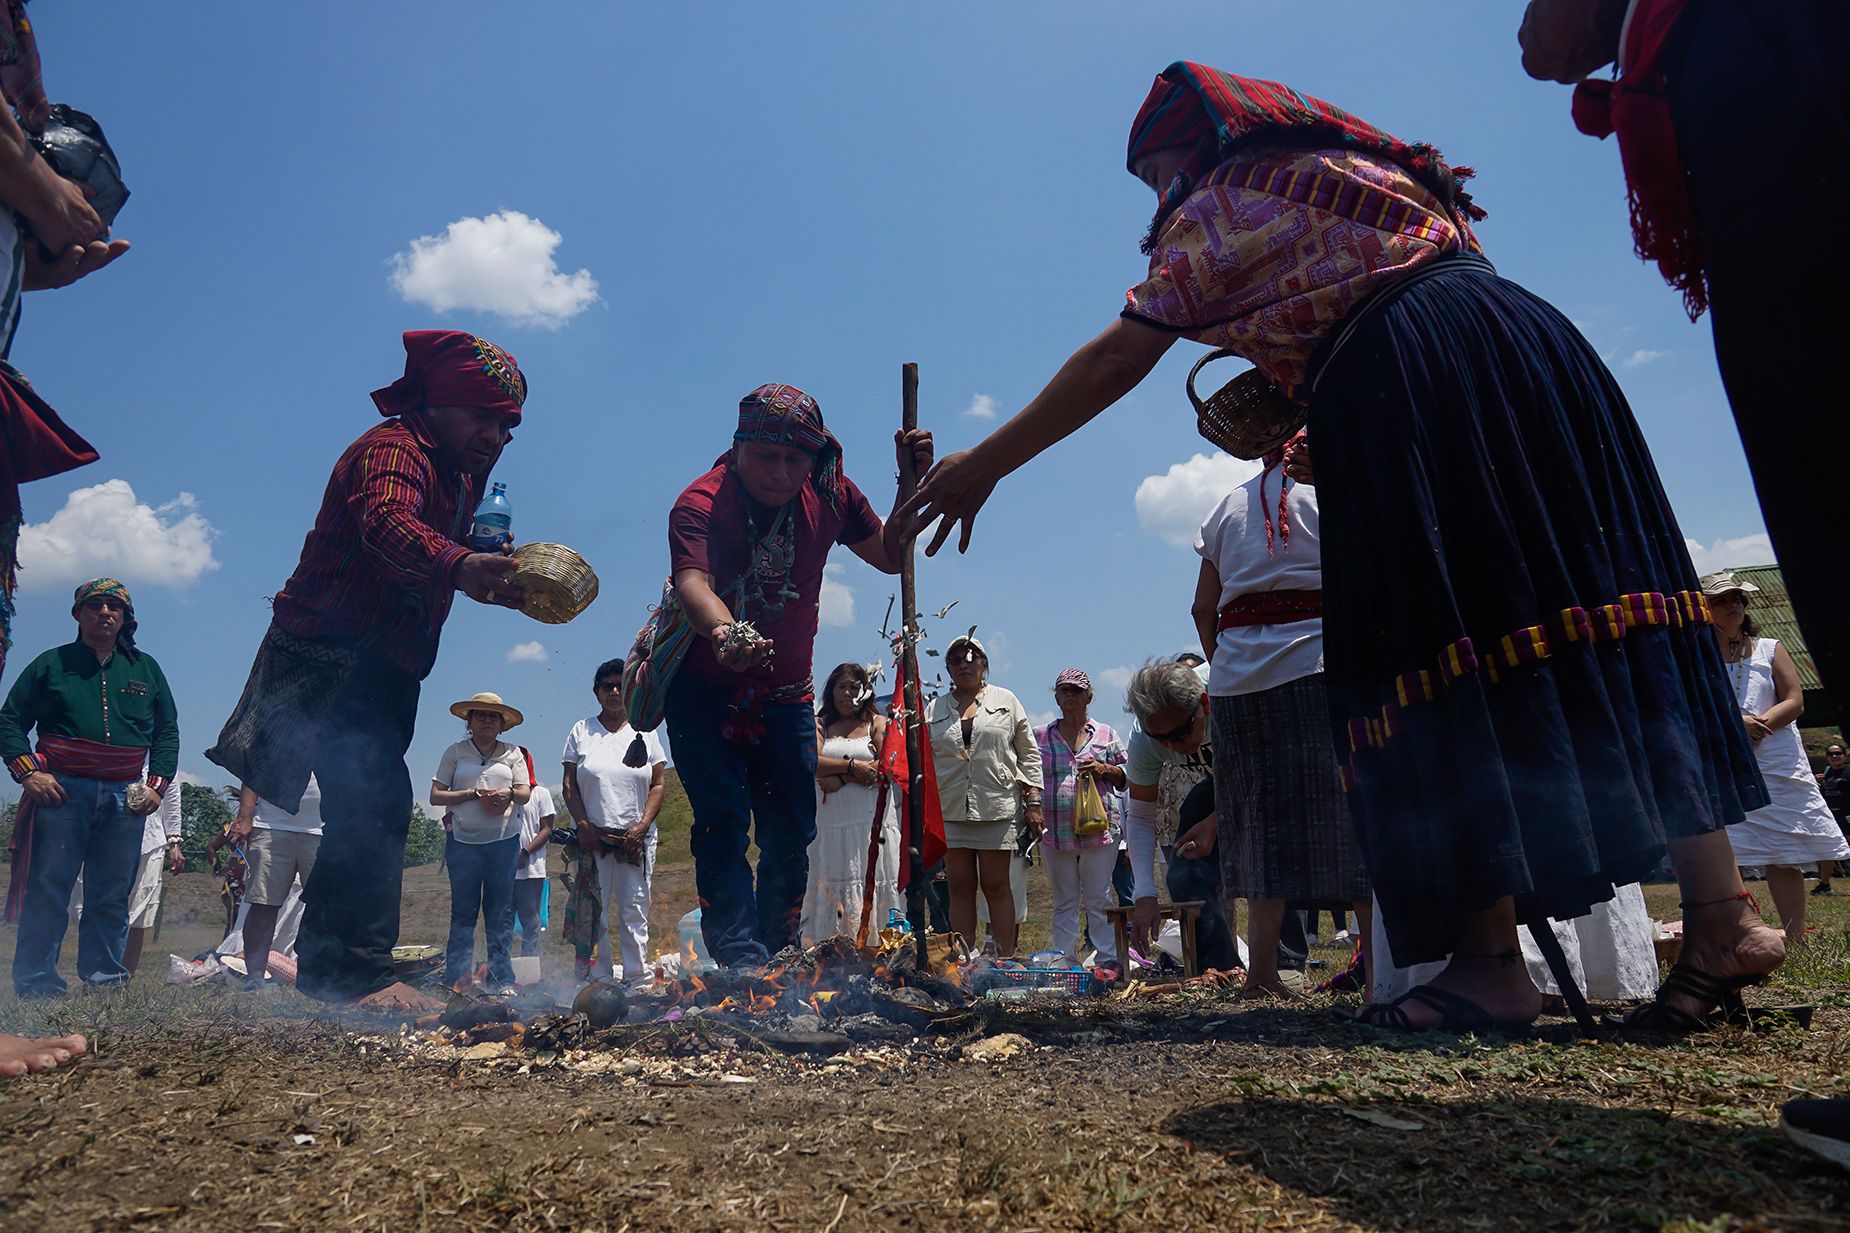 Salvadoran indigenous people deliver offerings to the fire during the celebration of the spring equinox 2023 at the archaeological site of San Andrés in the Zapotitán Valley of El Salvador.